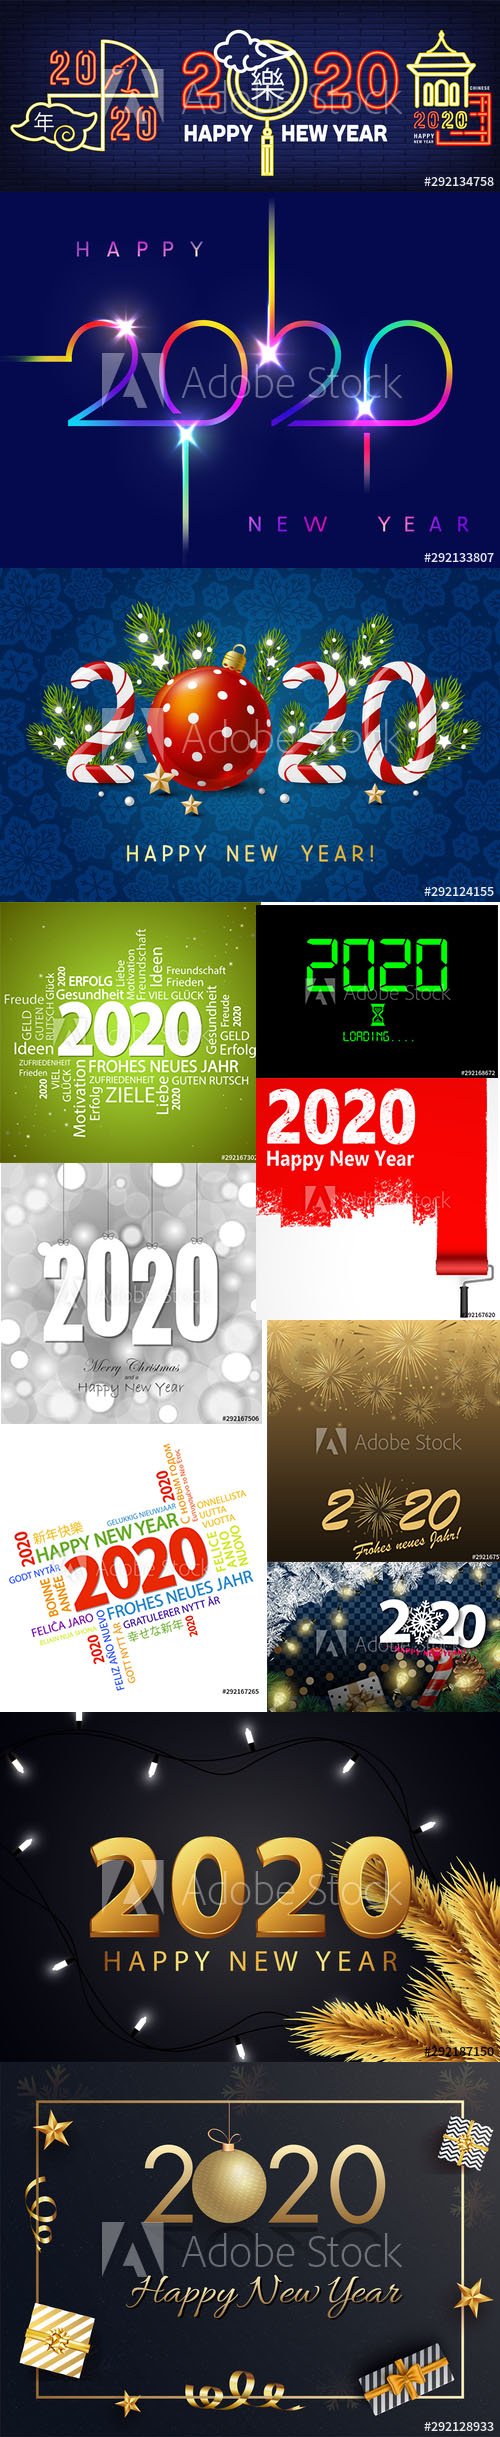 Merry Christmas and Happy New Year 2020 Illustrations Set 5